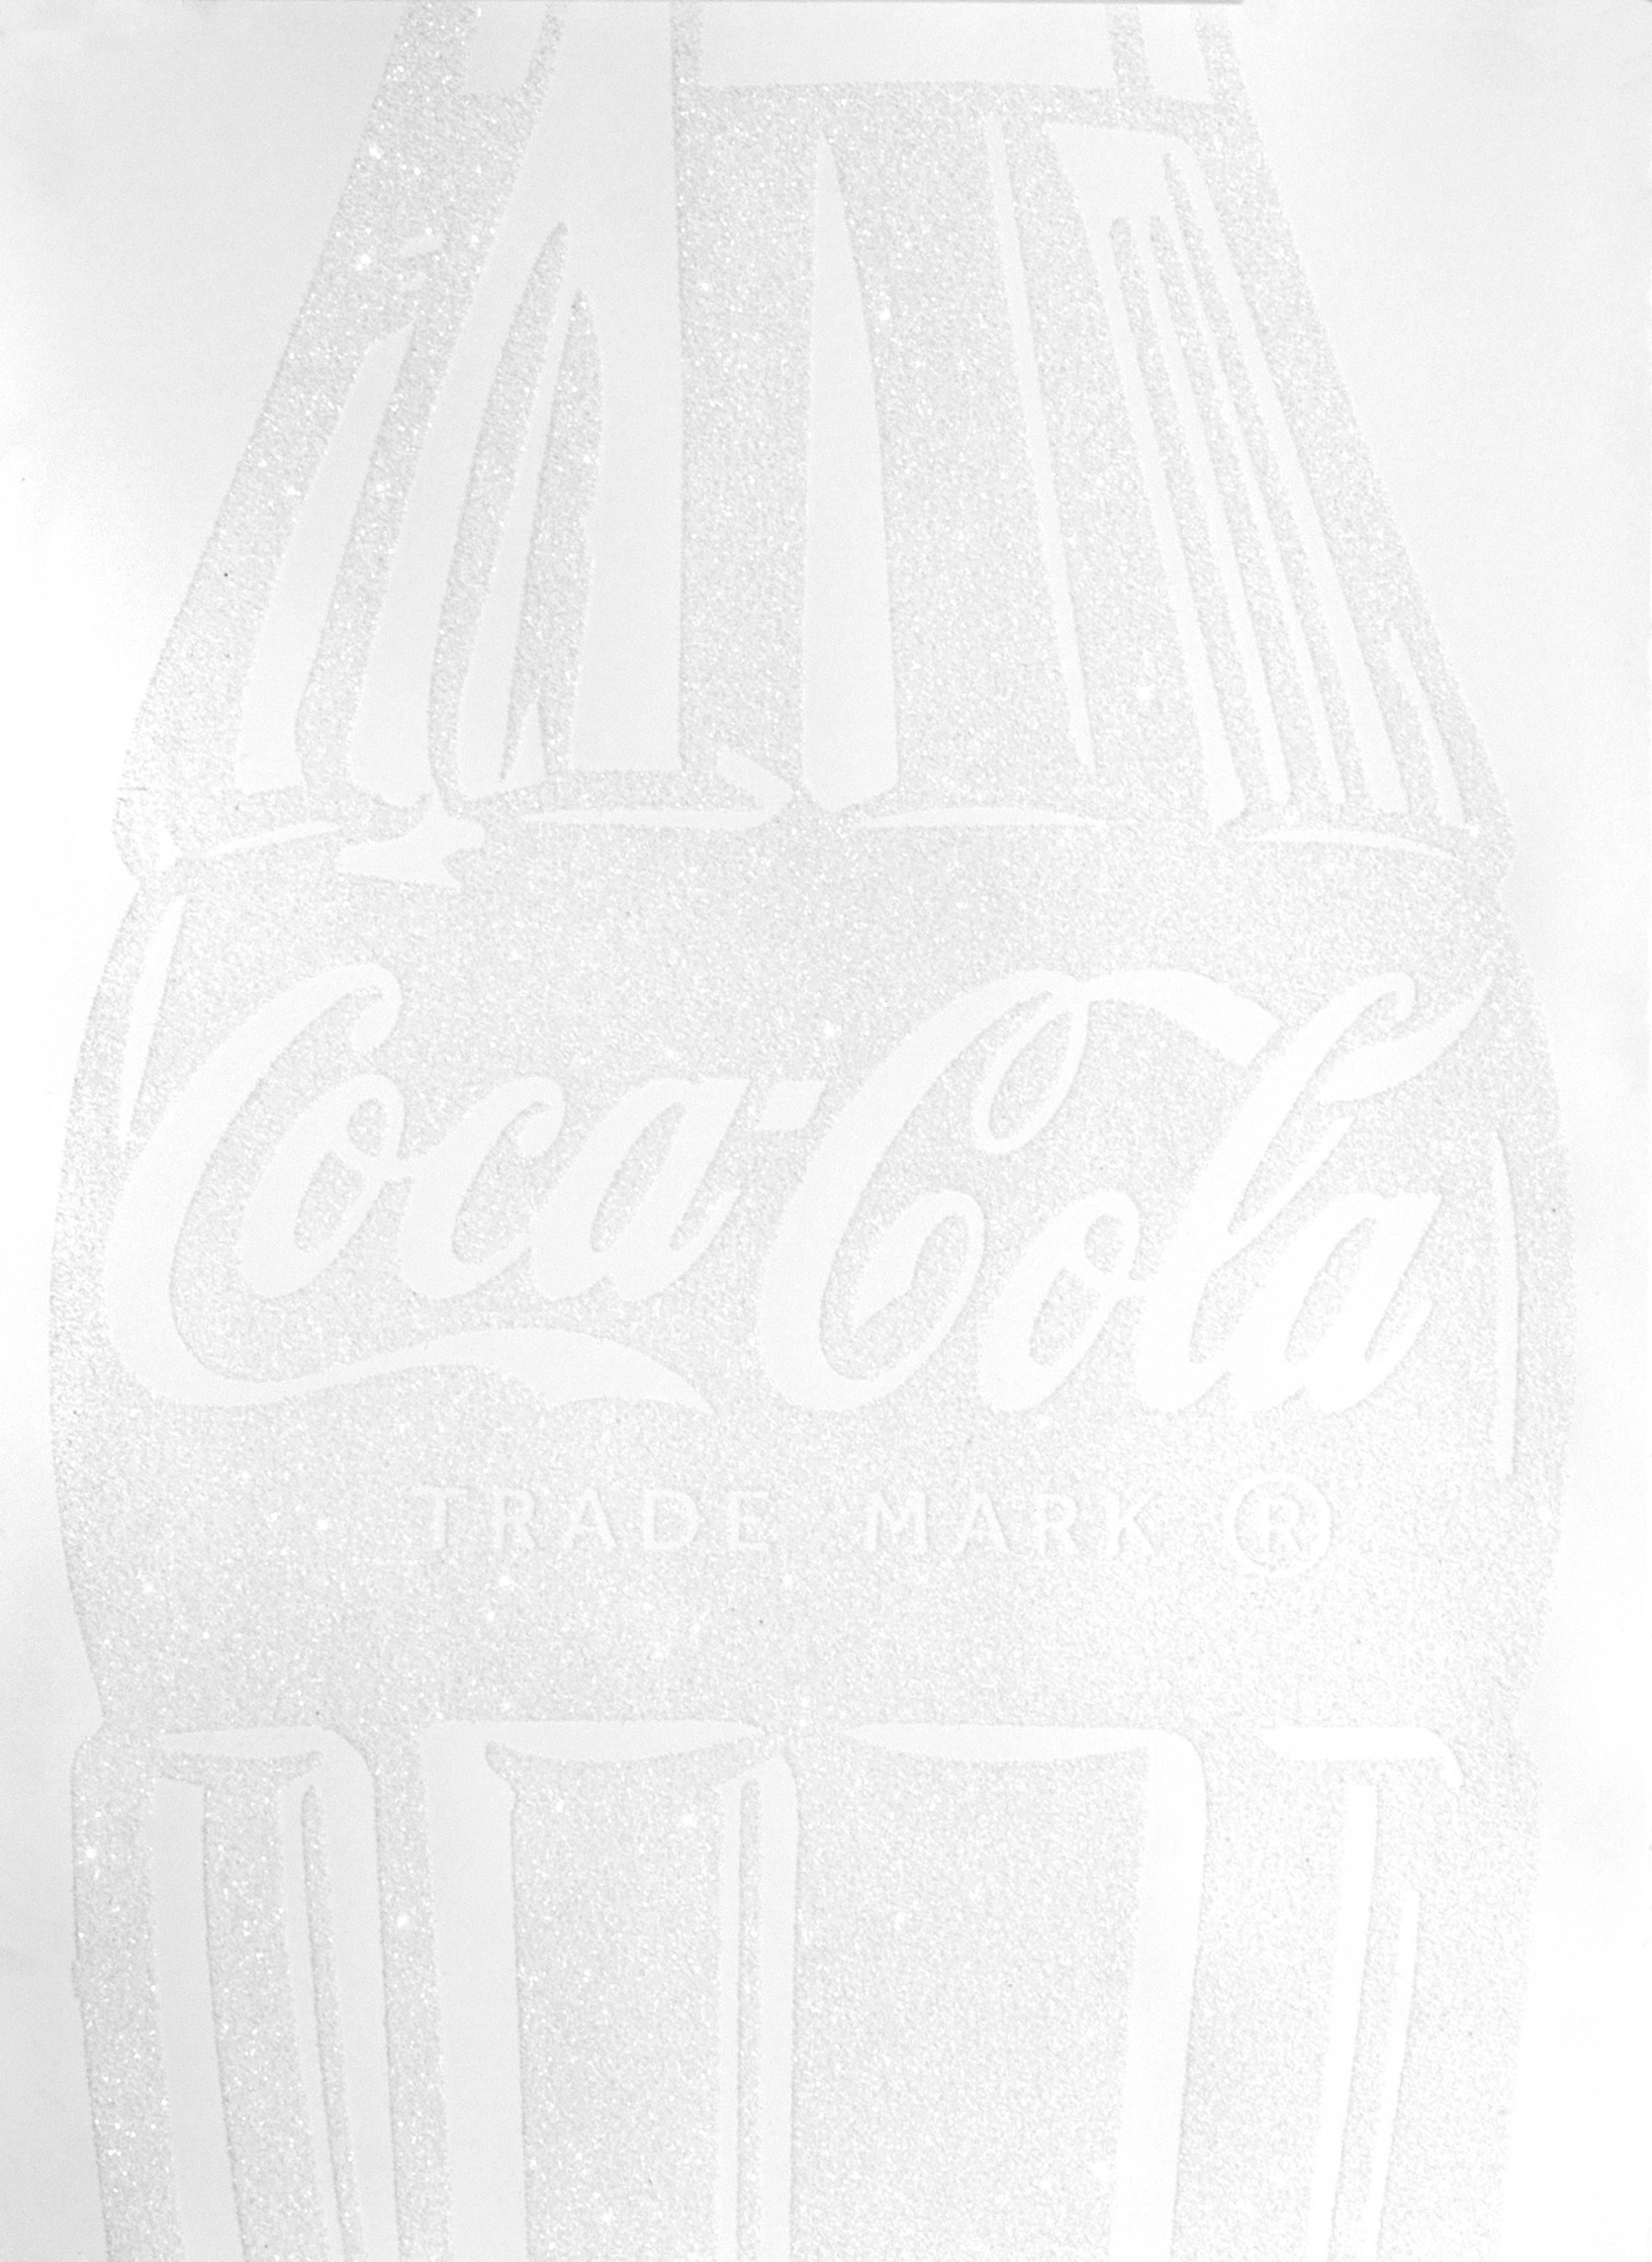 Single Coca-Cola (white on white) by Cey Adams